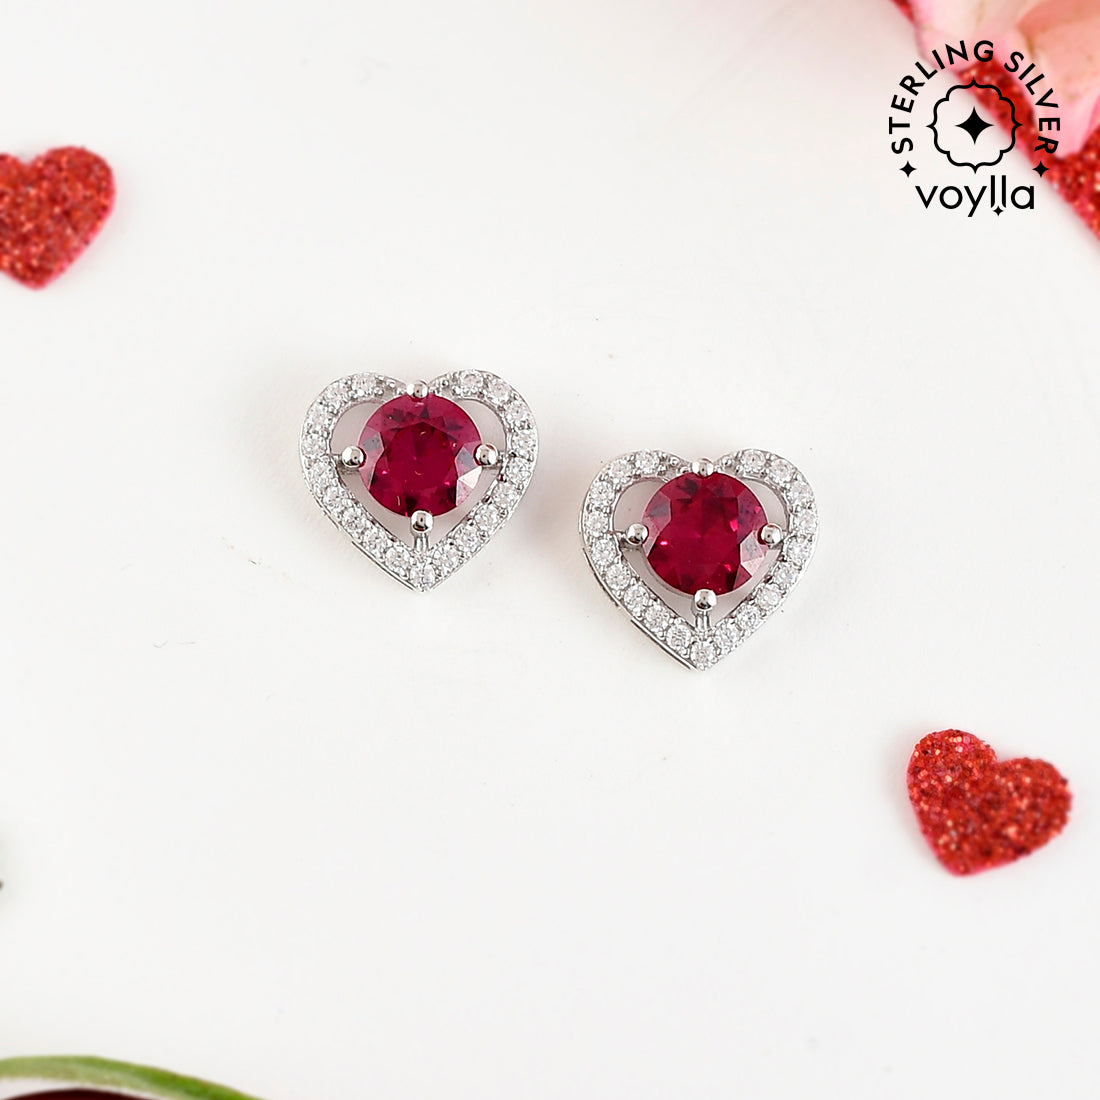 Women's Red And Silver Cz Heart Earrings - Voylla